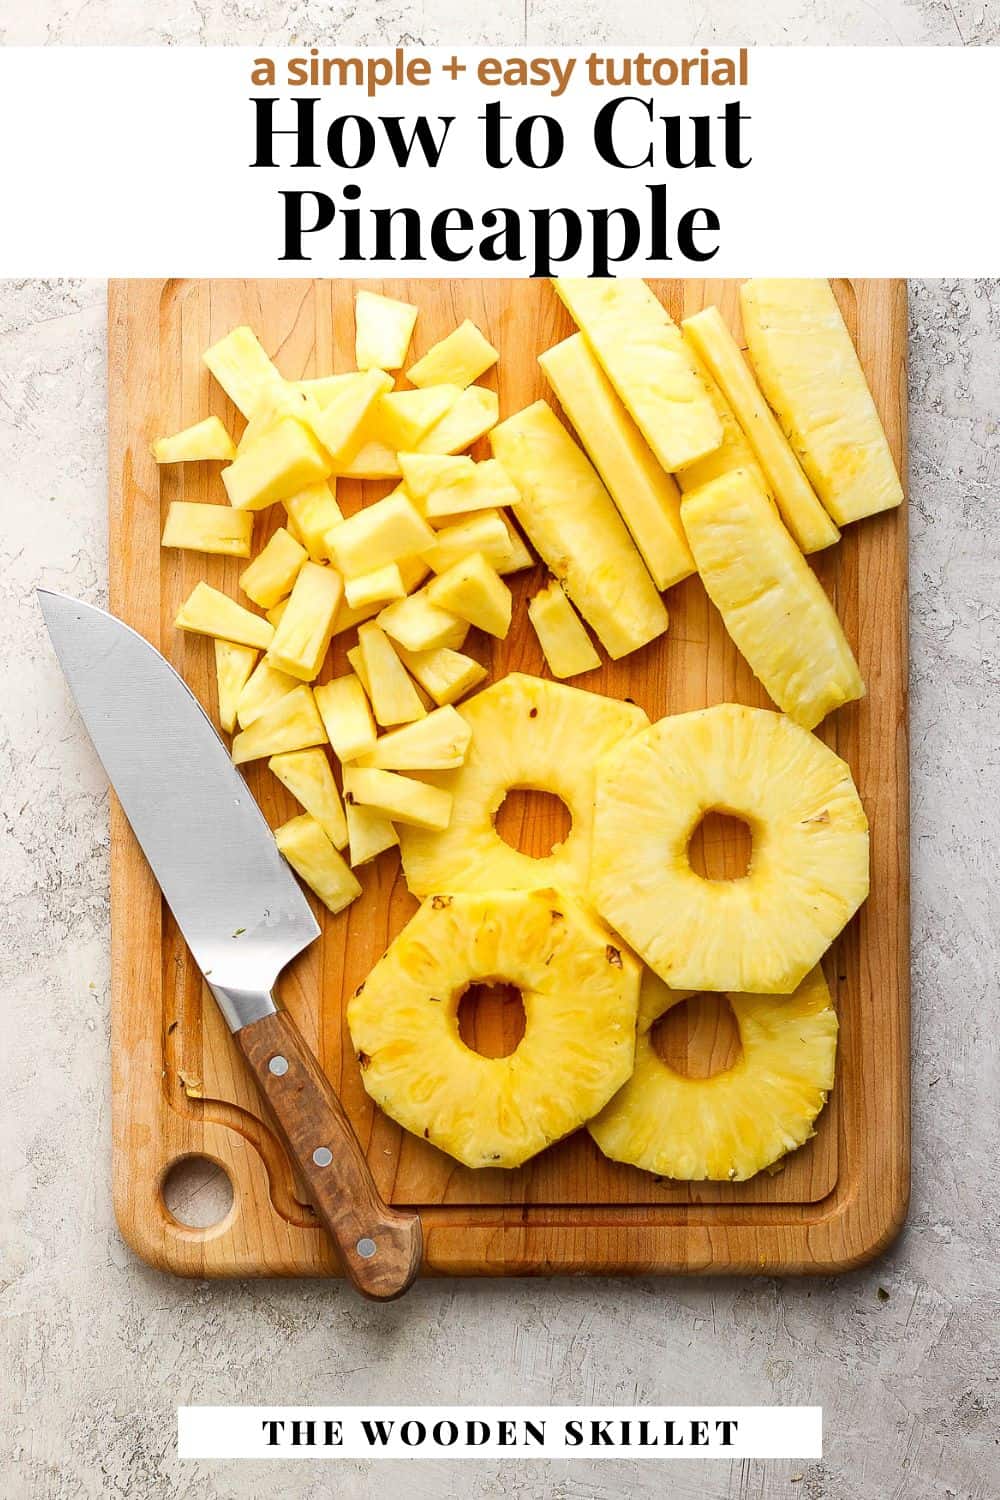 Pinterest image showing cut pineapple on a wooden cutting board with the title "how to cut pineapple a simple + easy tutorial"